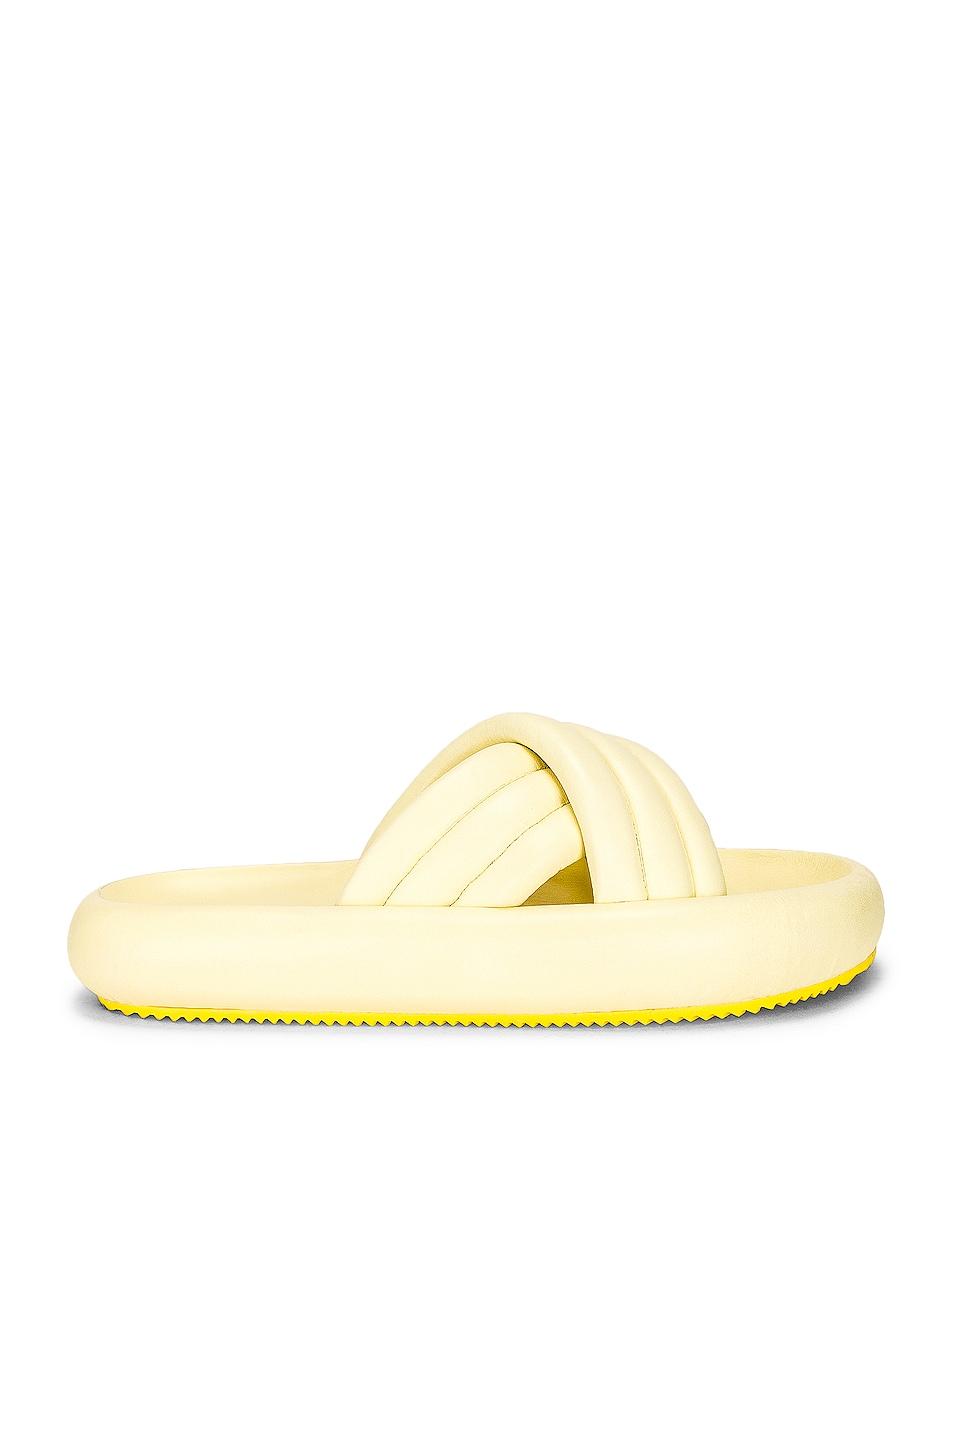 Isabel Marant Niloo Leather Sandal in Yellow | Lyst